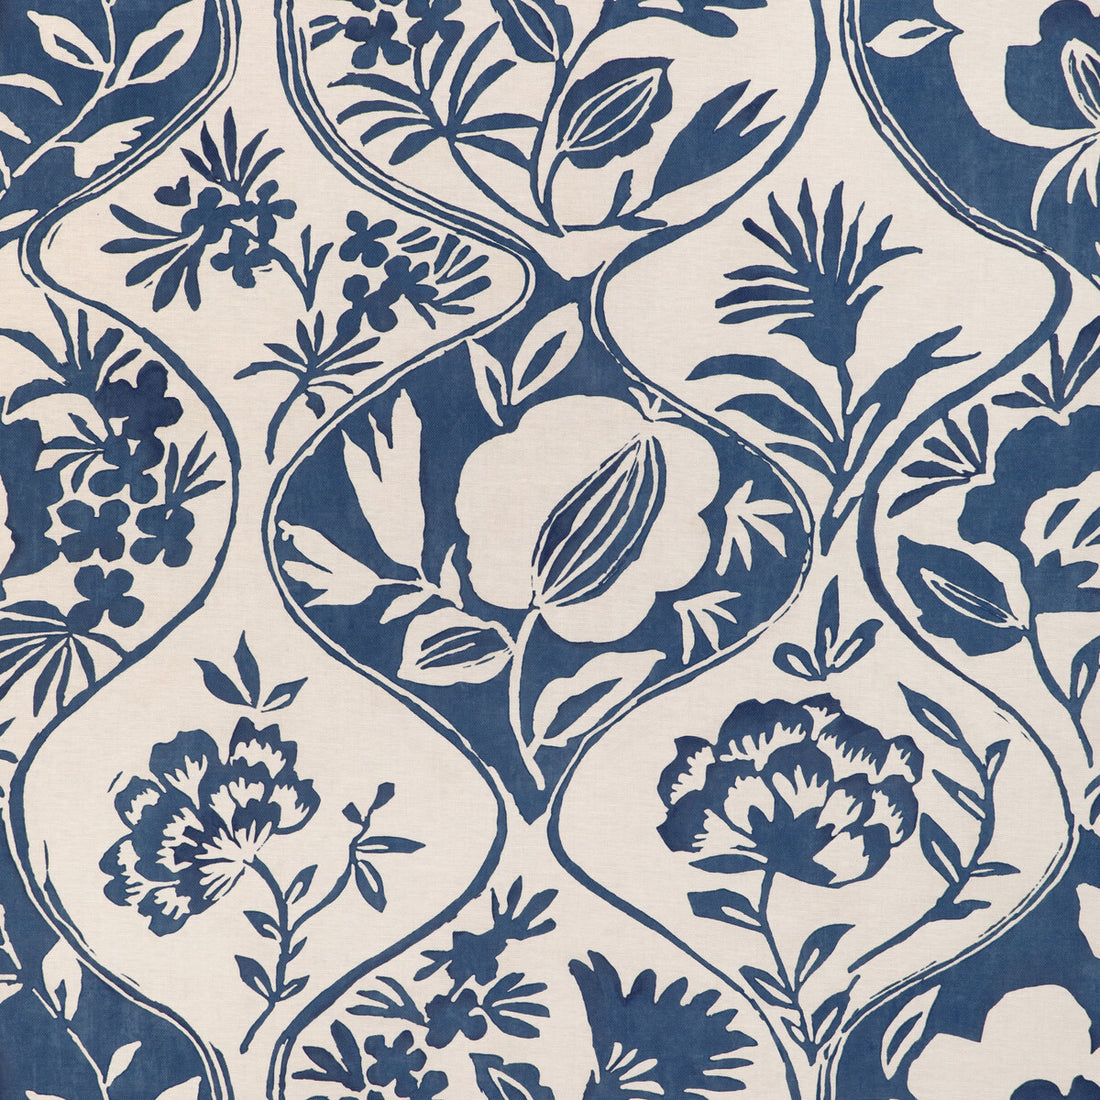 Calathea Print fabric in indigo color - pattern 2023141.50.0 - by Lee Jofa in the Garden Walk collection